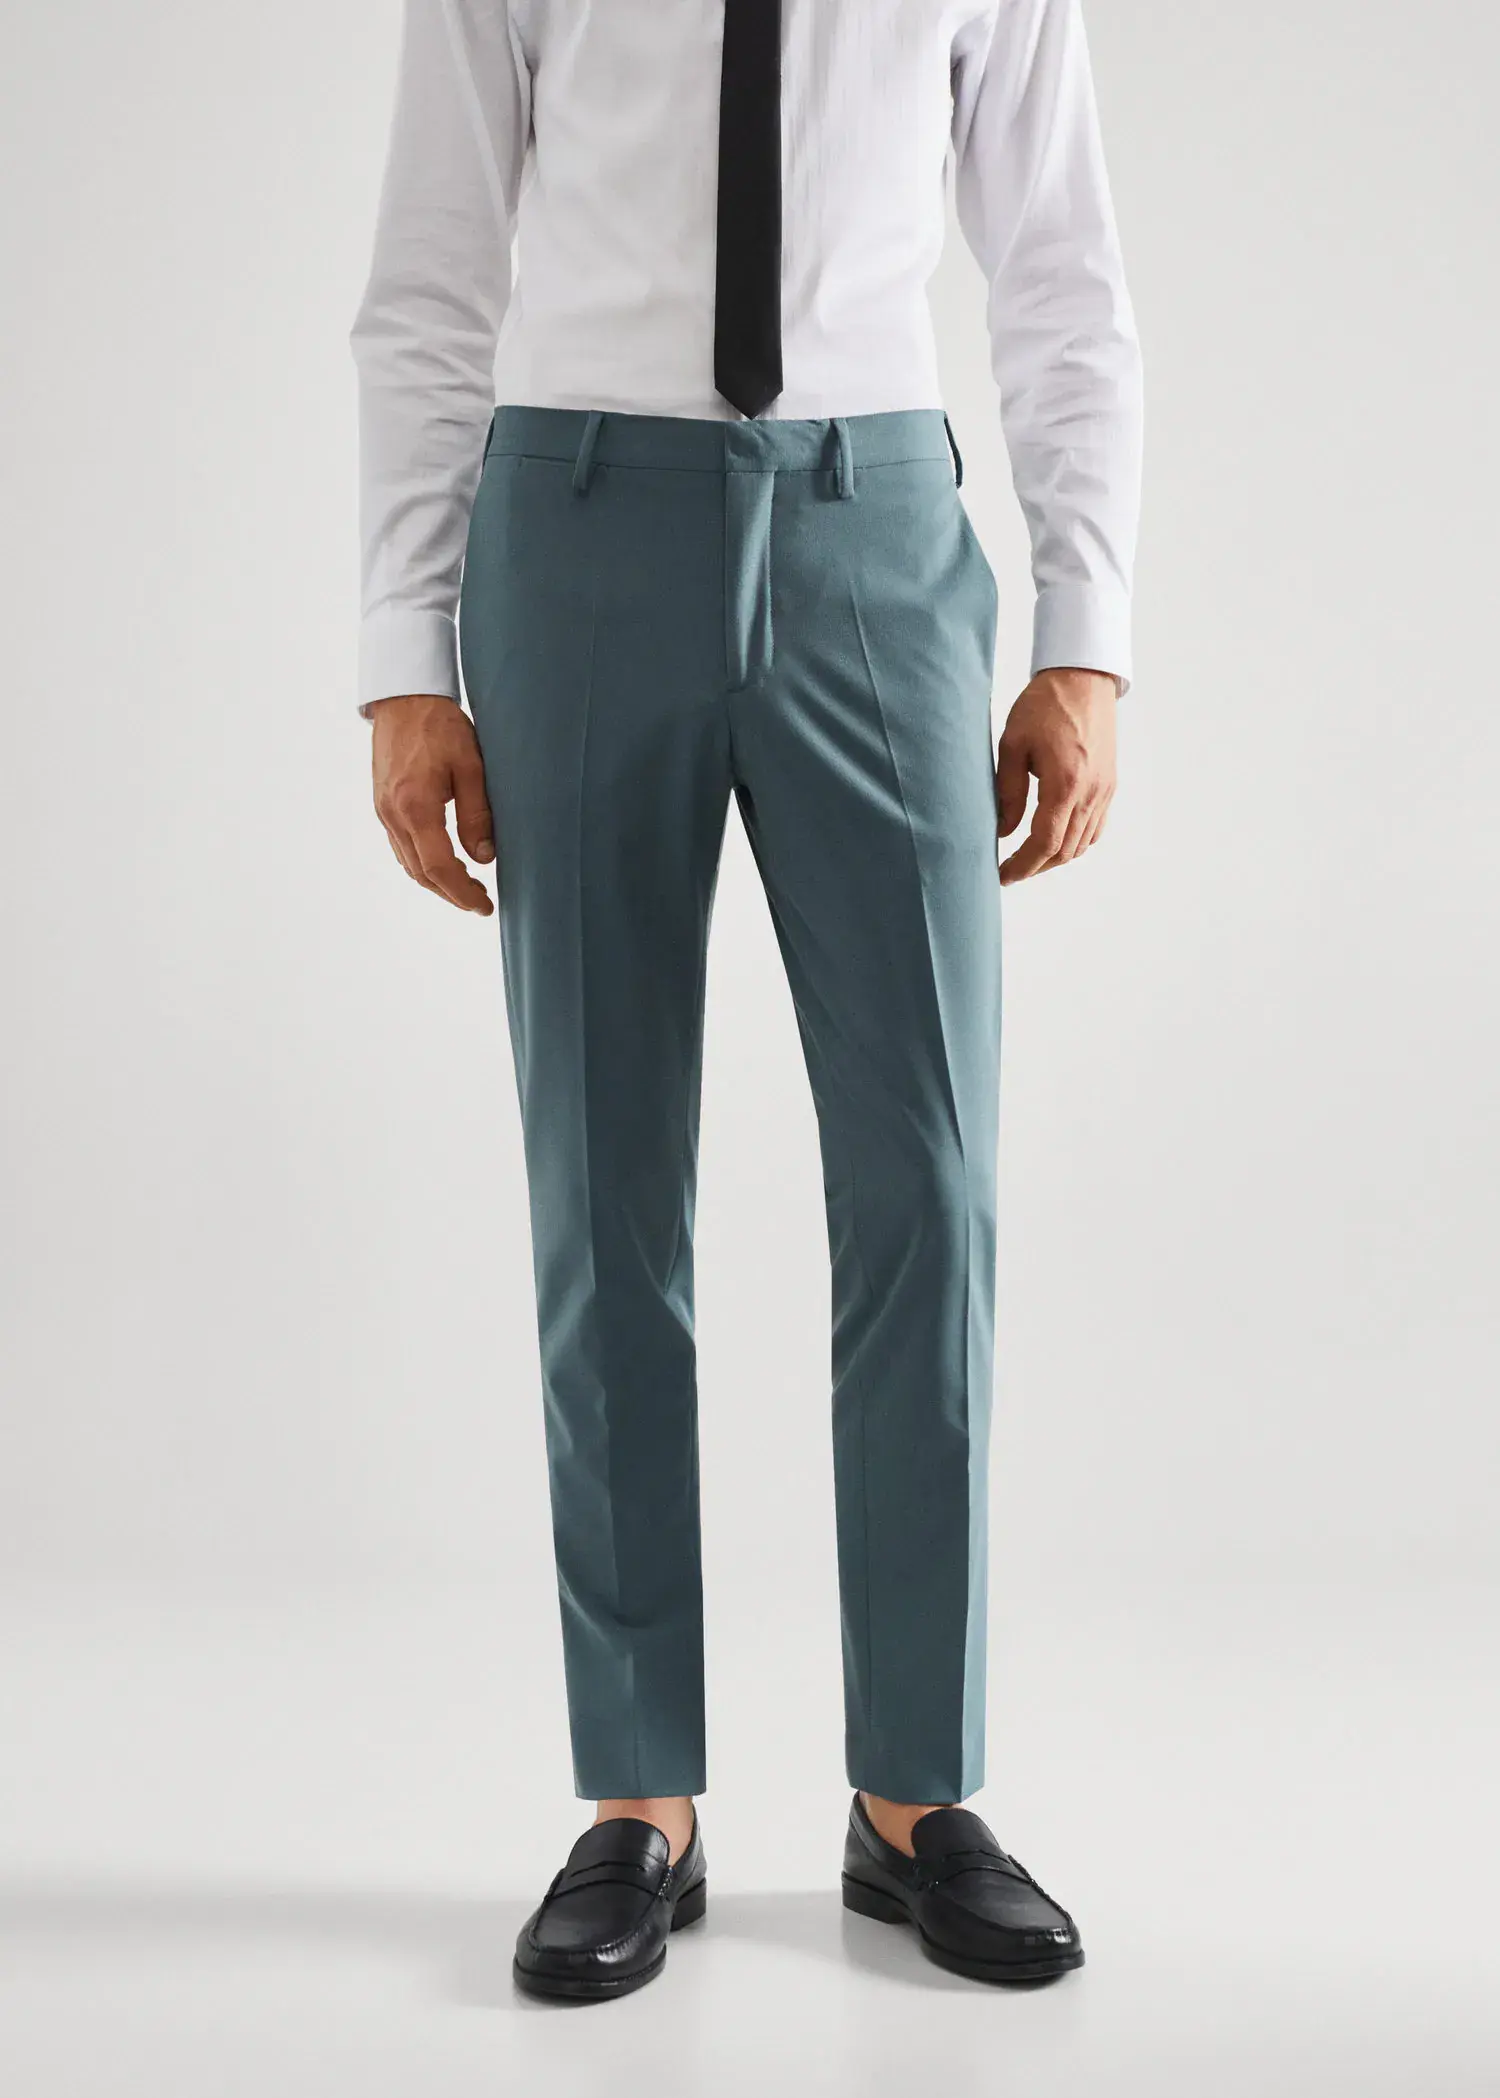 Mango Stretch fabric super slim-fit suit pants. a man wearing a suit and tie standing in front of a white wall. 